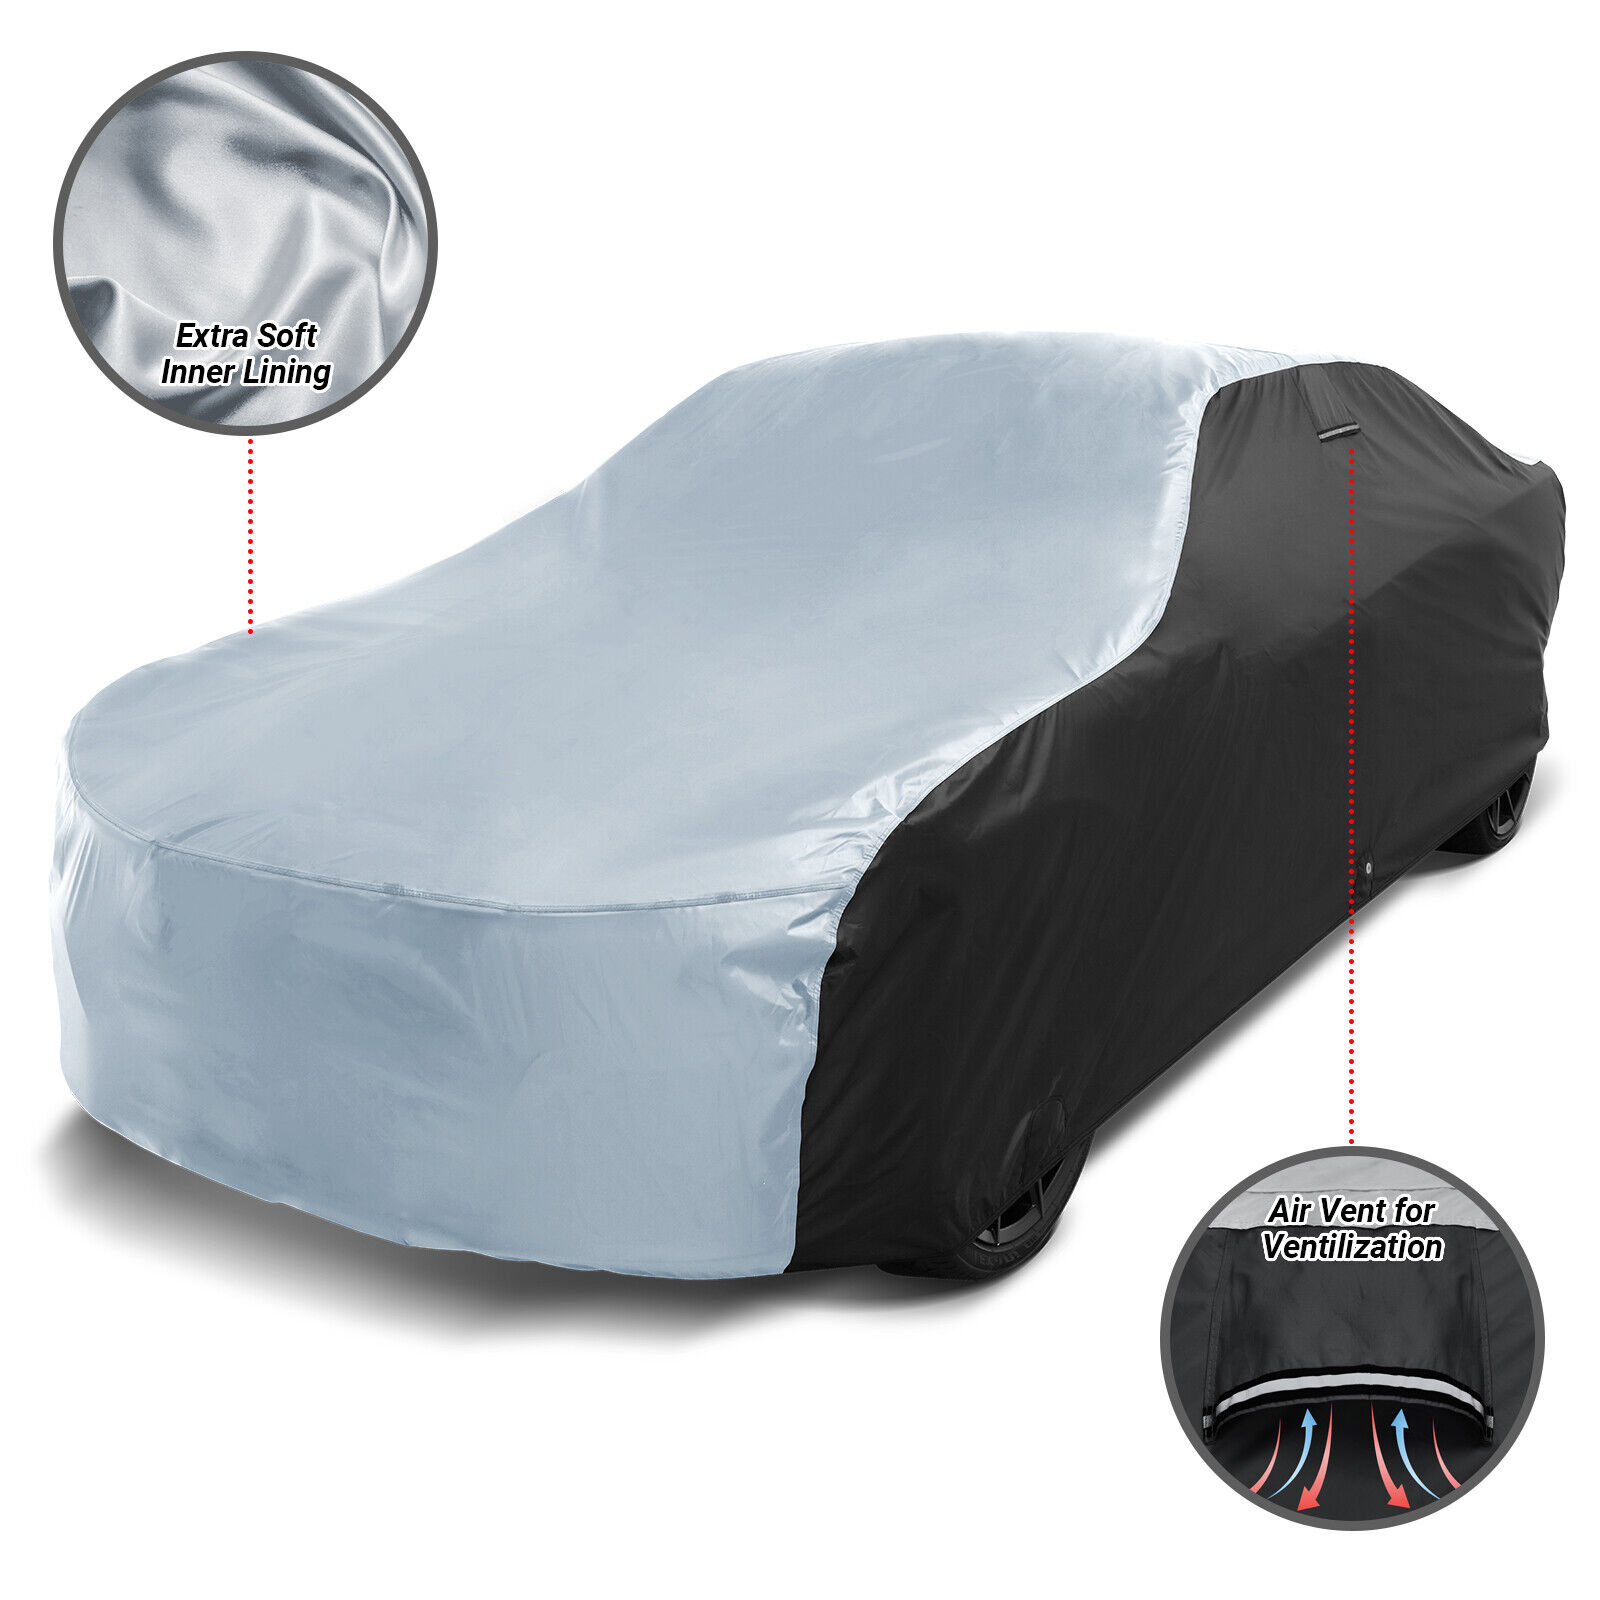 For CHEVY [CAMARO] Custom-Fit Outdoor Waterproof All Weather Best Car Cover